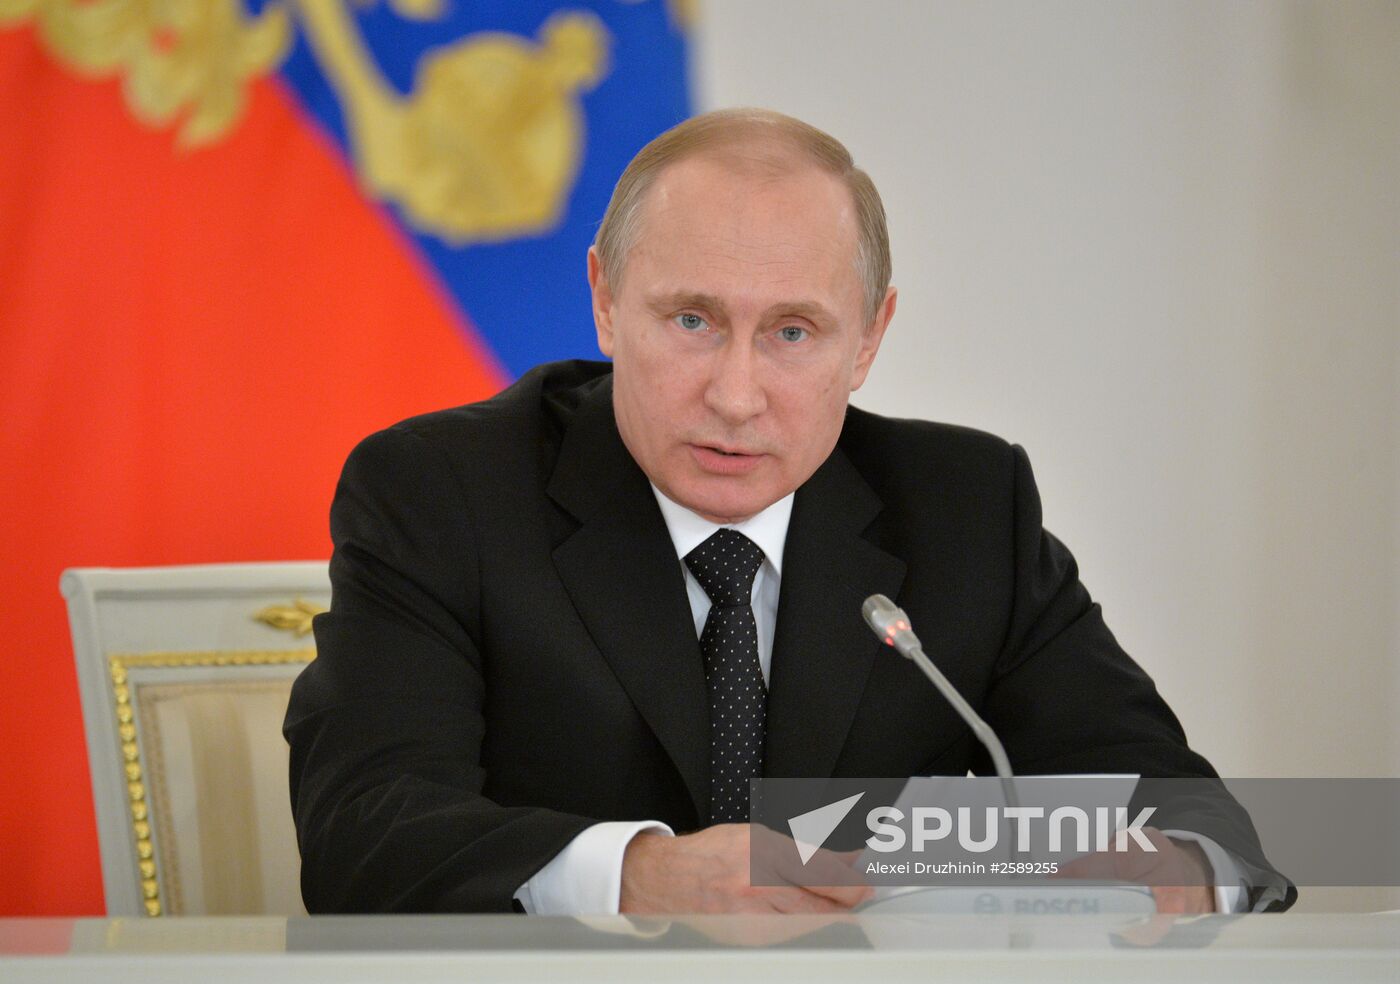 President Vladimir Putin chaired 36th meeting of Organizing Committee for preparing for Victory Day celebrations